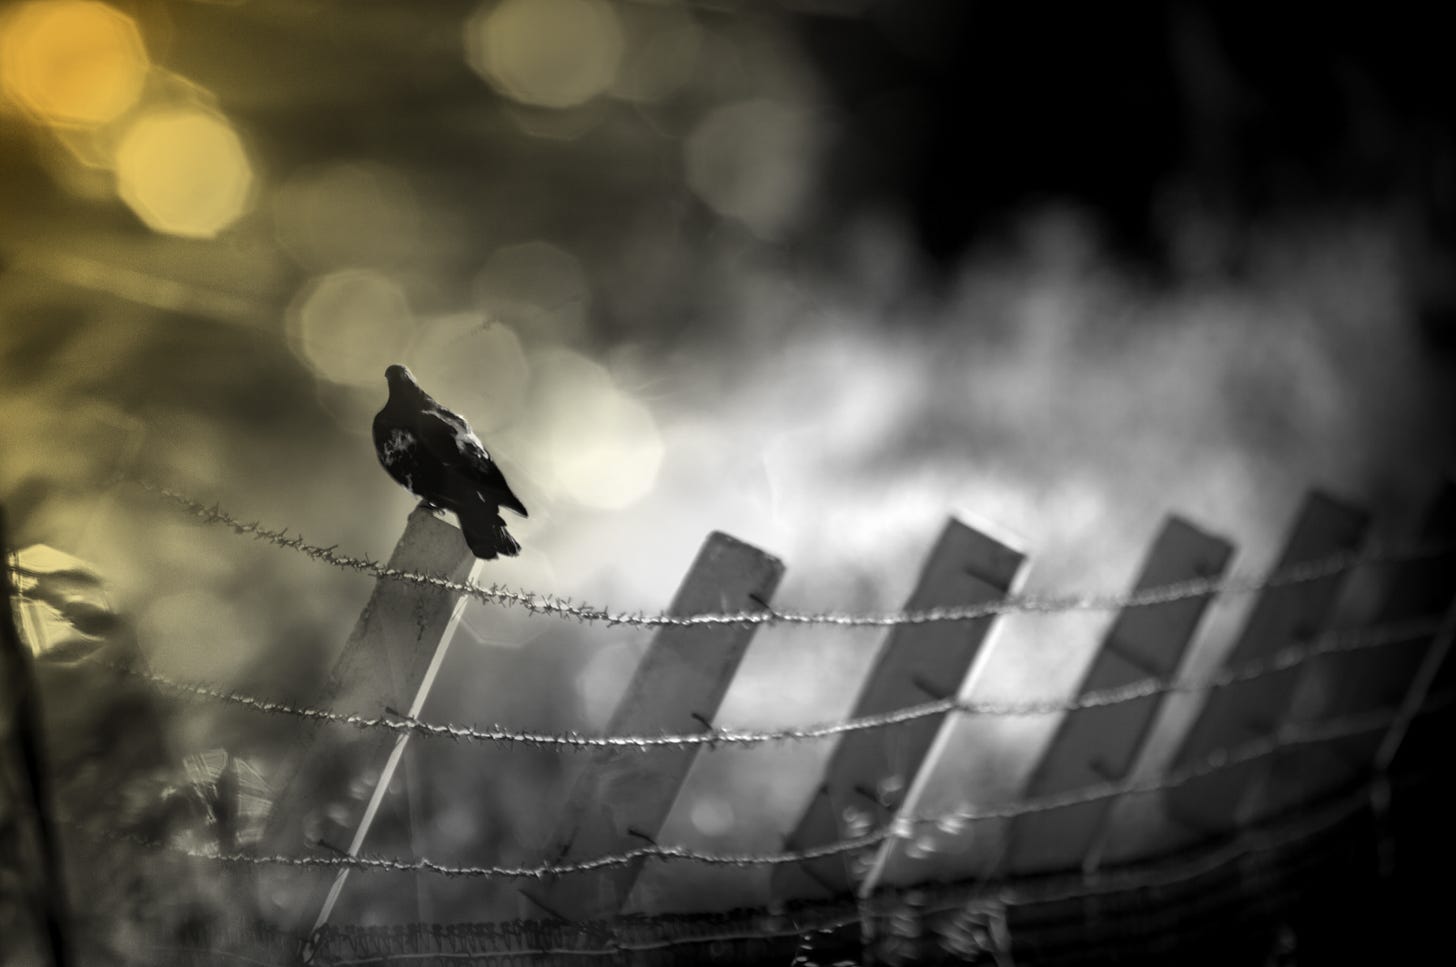 Black and white photo of a black bird sitting on a barbed wire fence, facing a yellow glow